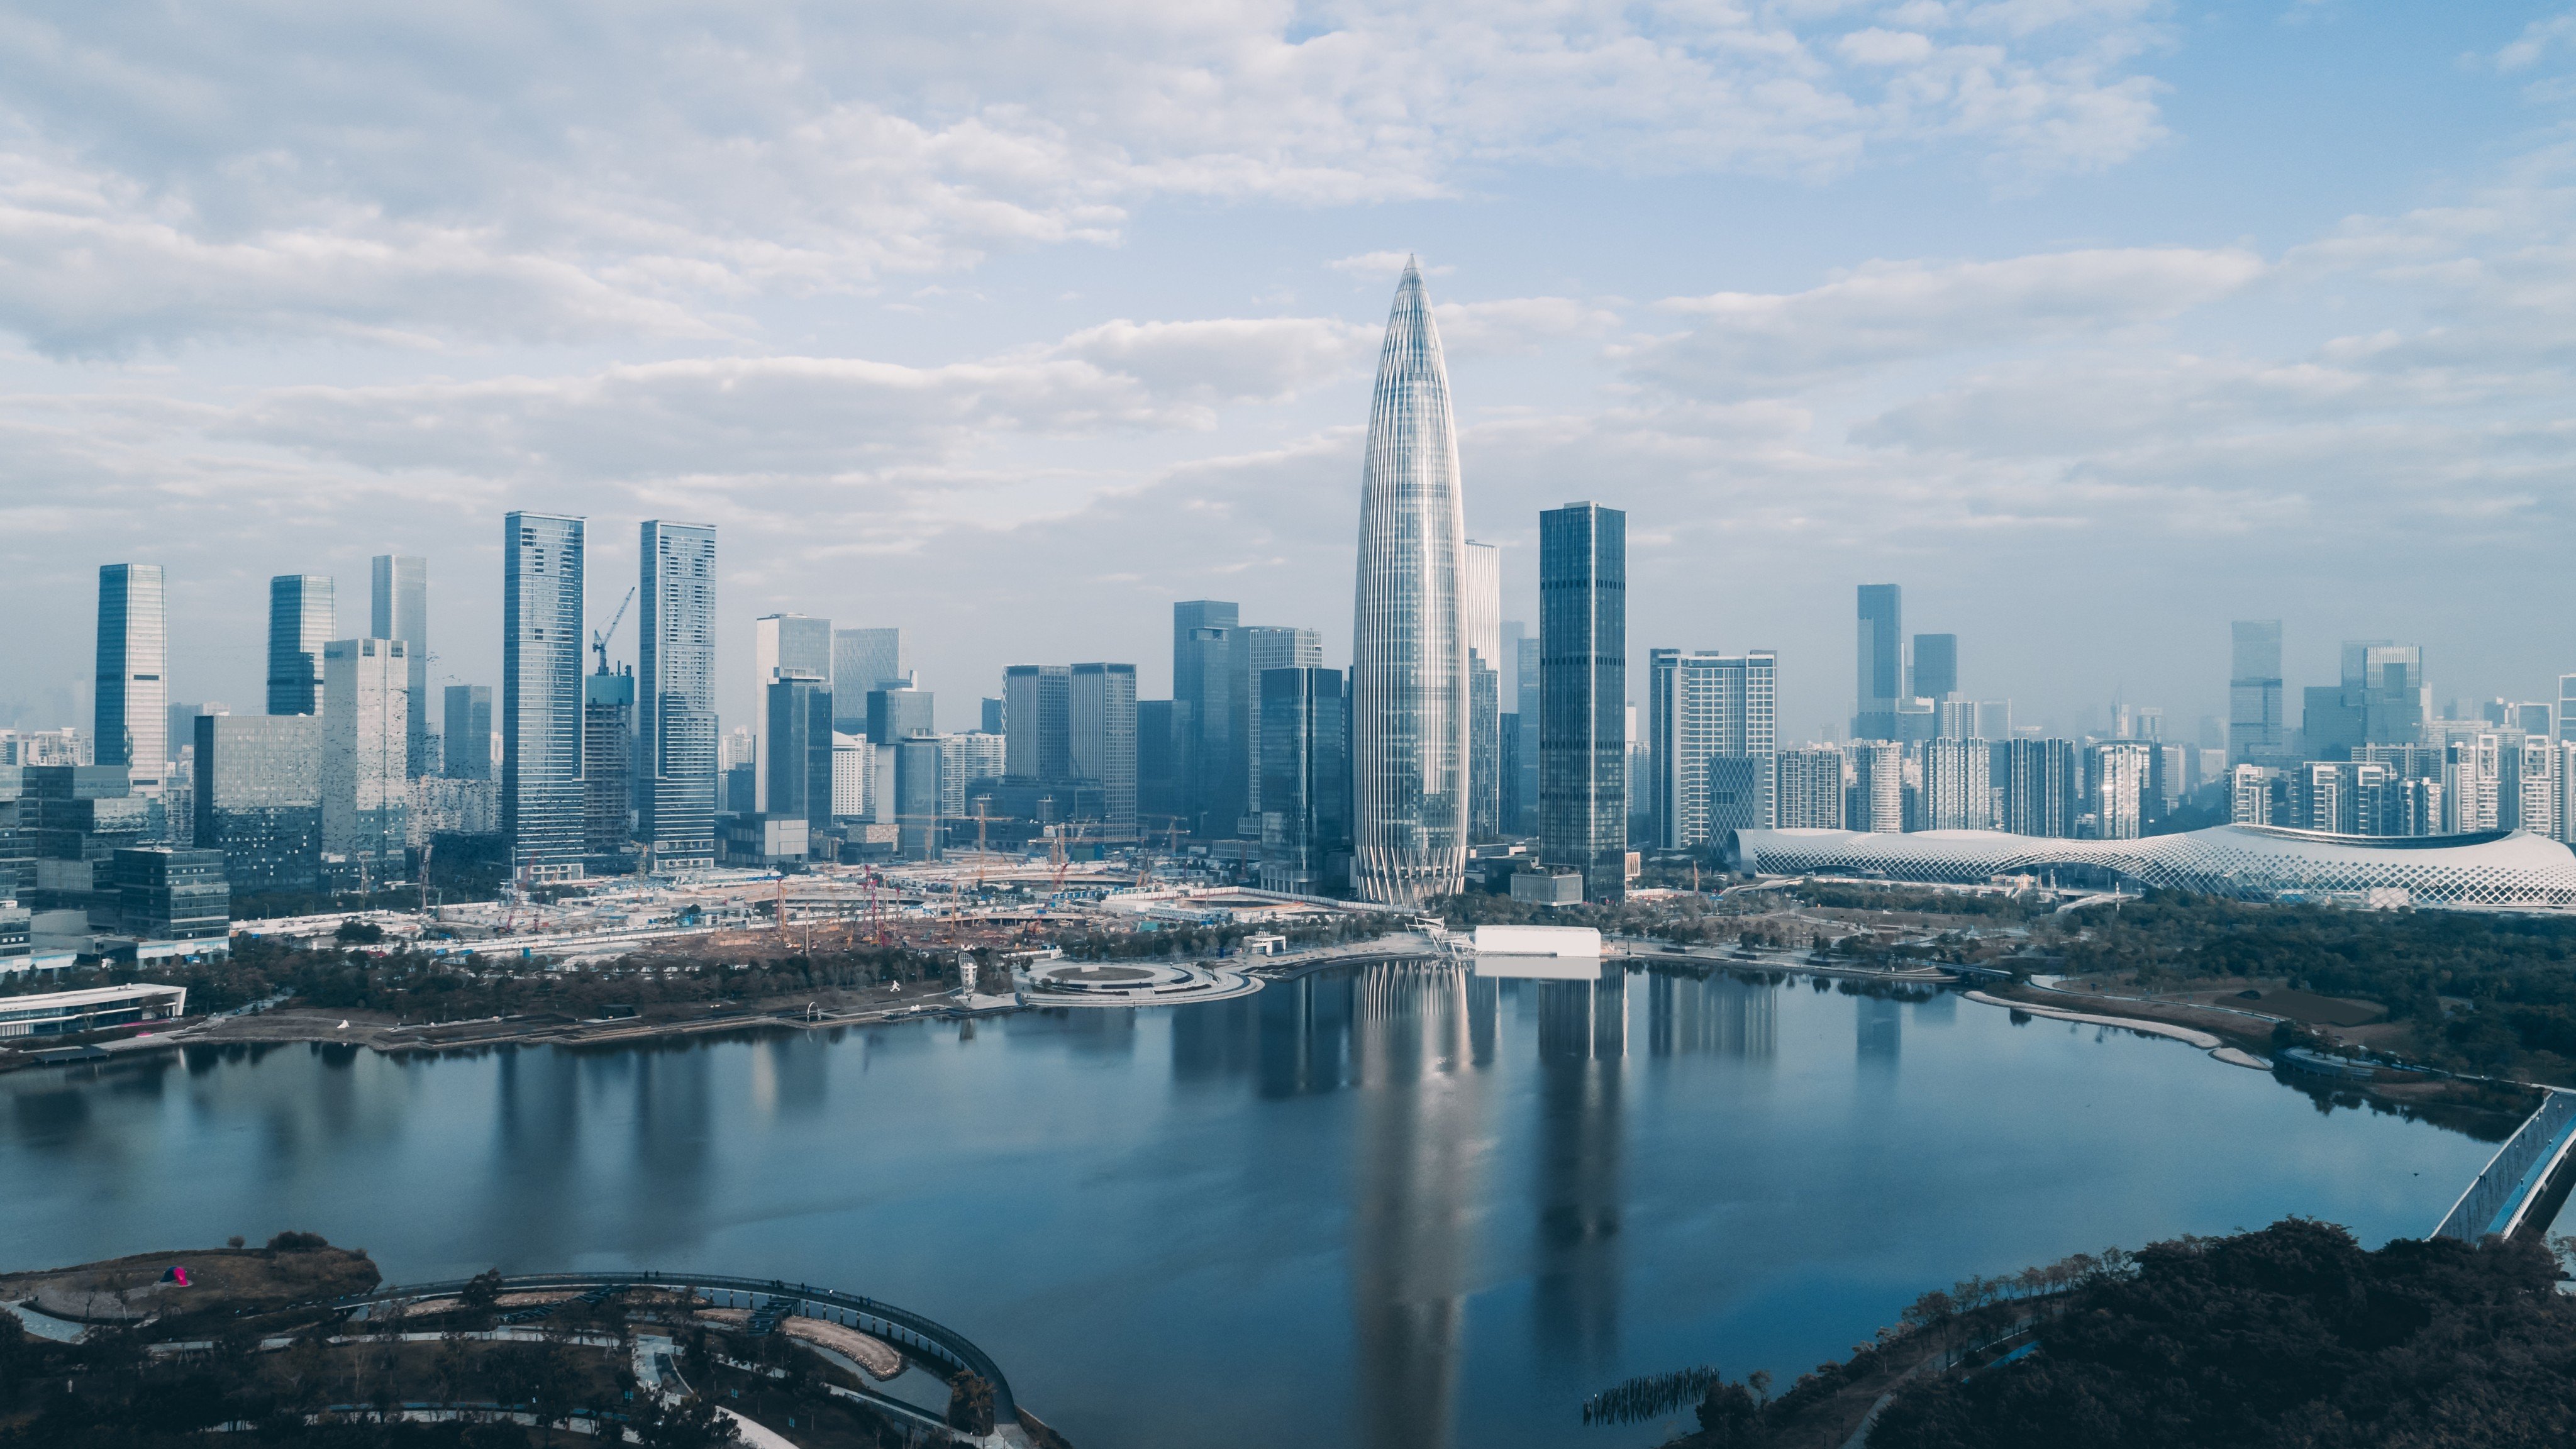 An aerial view of Shenzhen. Johor’s chief minister said he was “confident” that his state “can become the Shenzhen of Southeast Asia” thanks to a proposed special economic zone with Singapore. Photo: Shutterstock